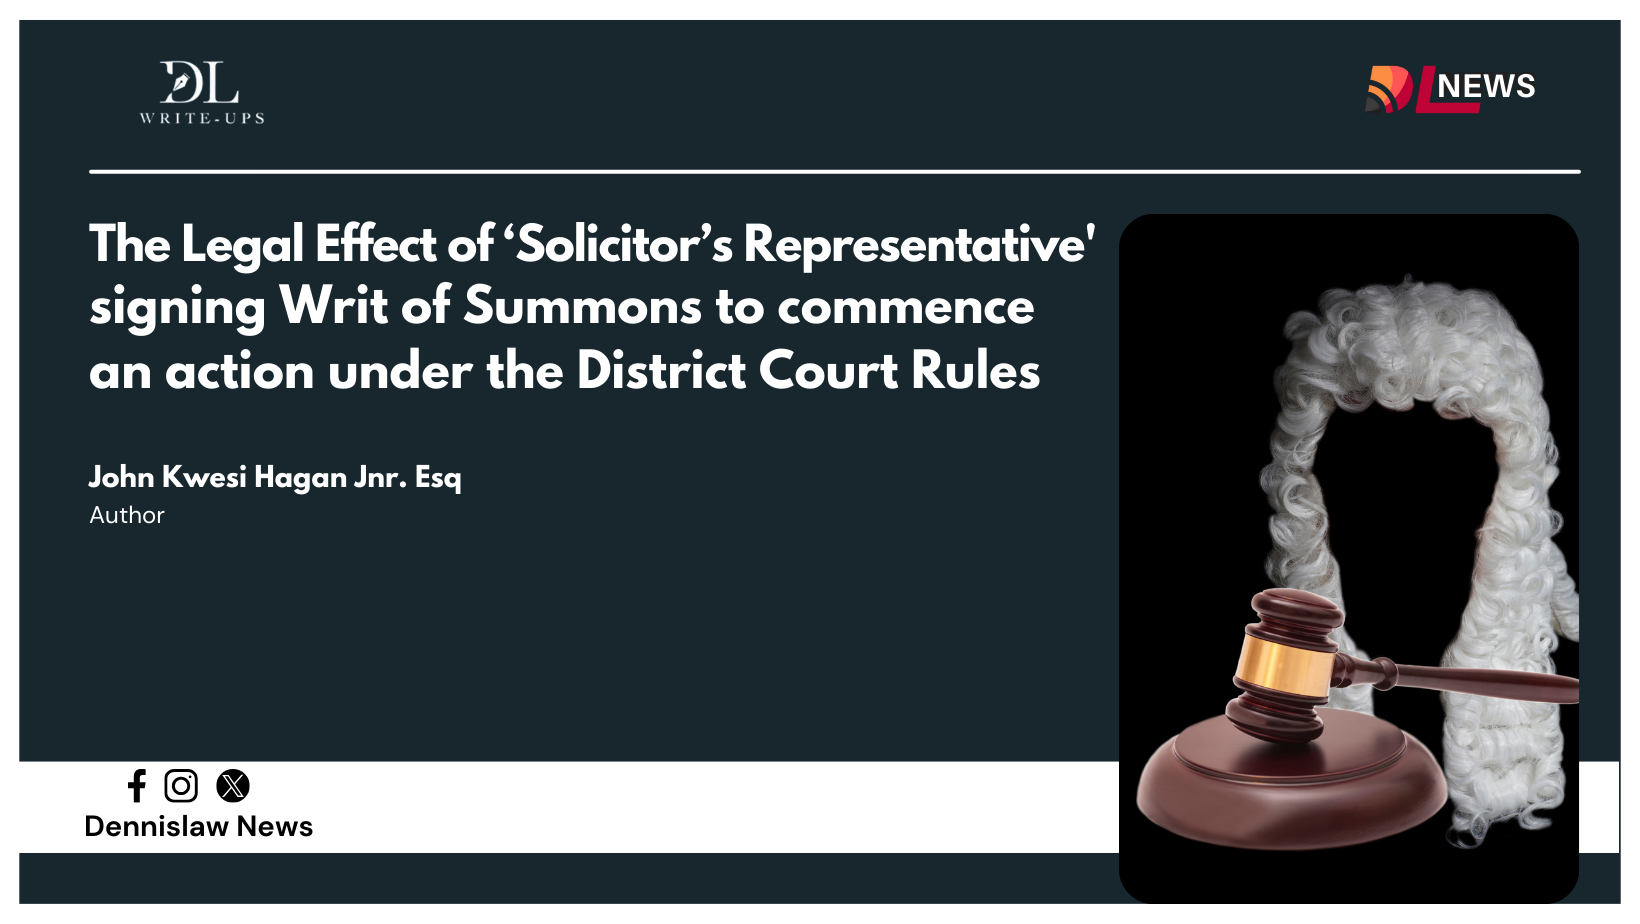 The Legal Effect of 'Solicitor's Representative' signing Writ of